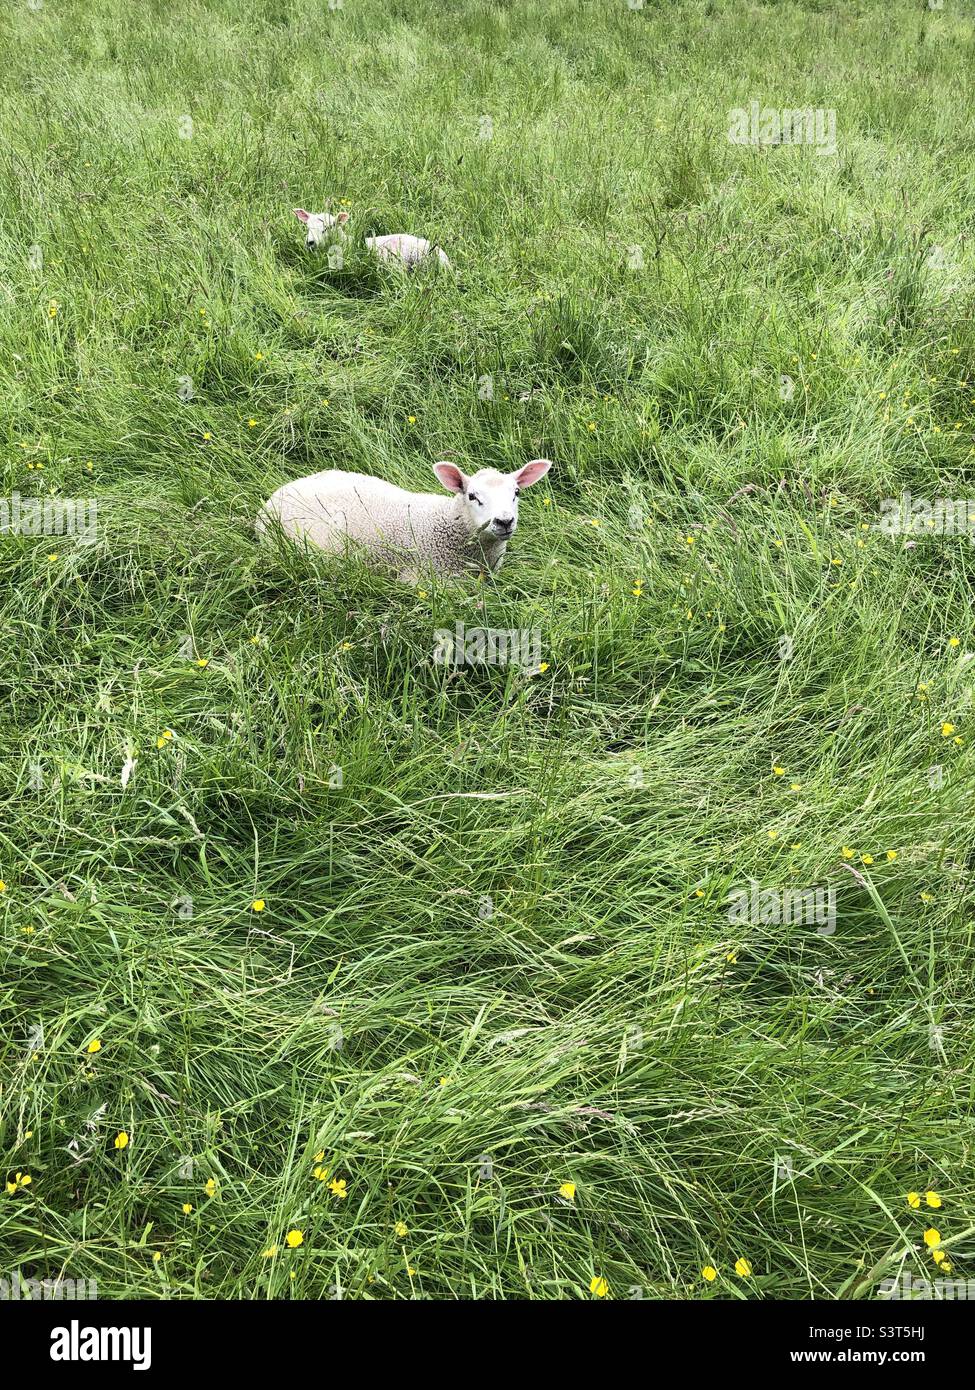 Two white faced lambs in a field of tall overgrown grass in June, England, United Kingdom Stock Photo